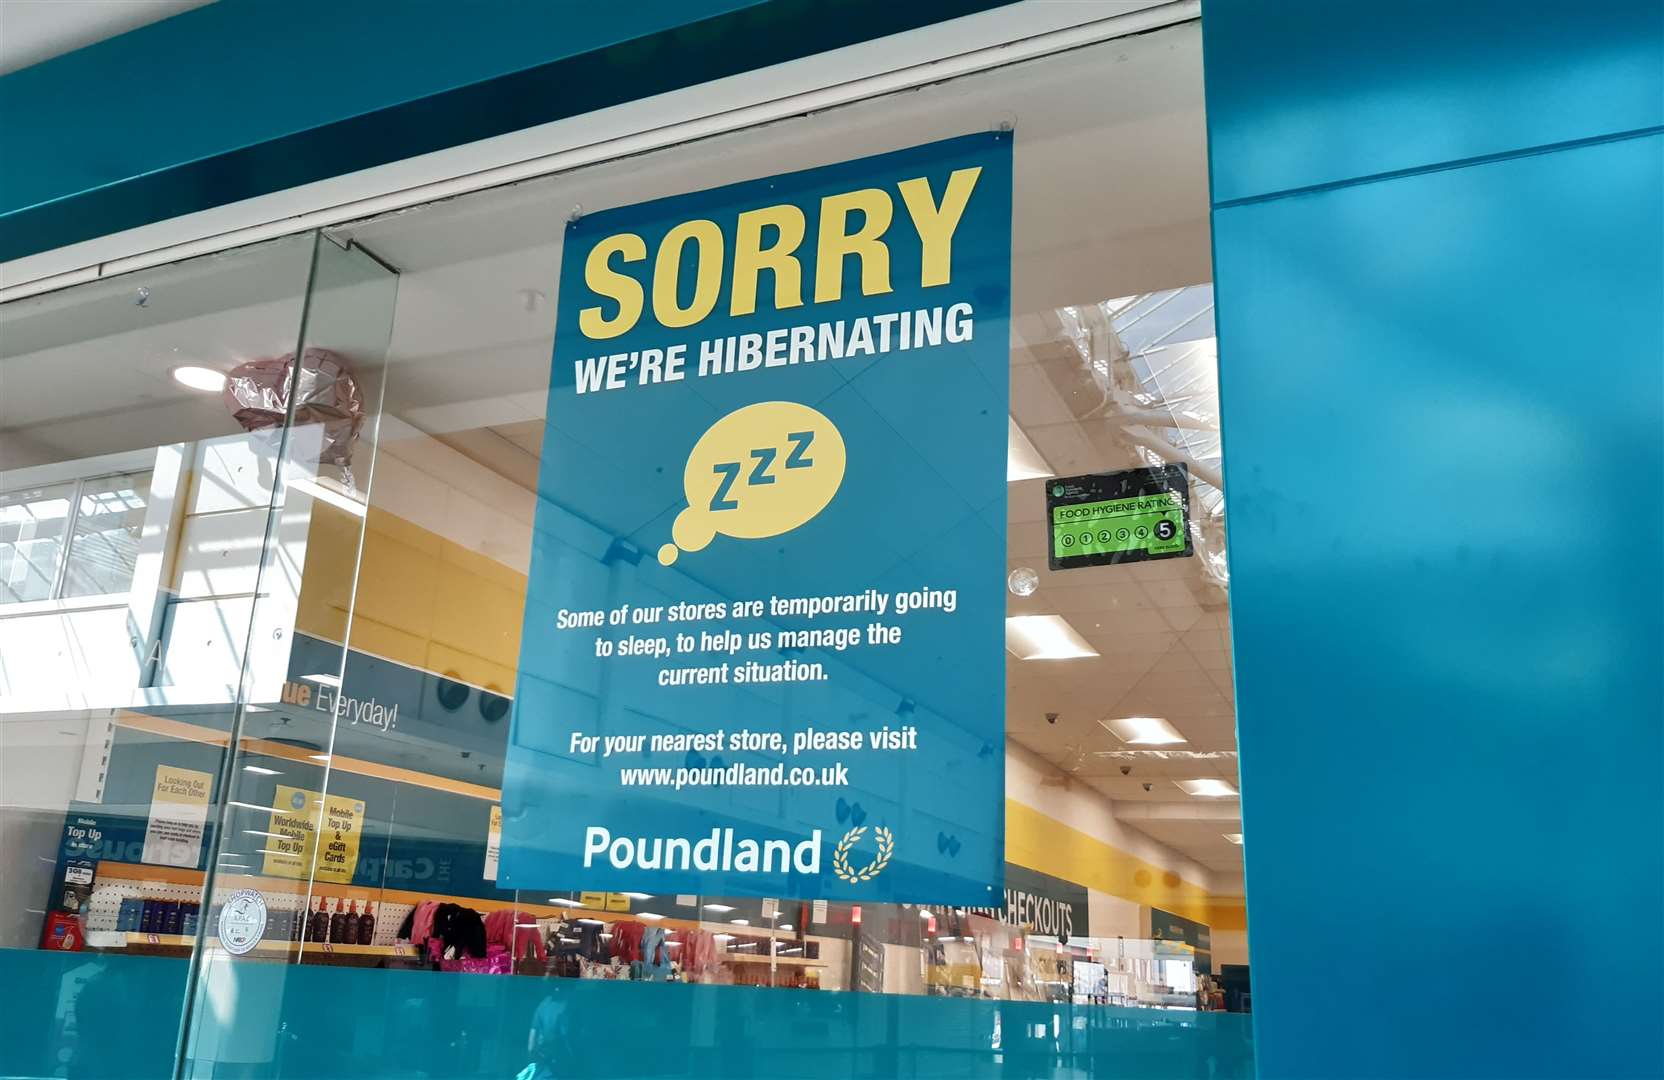 A sign has been put up at the front of the store